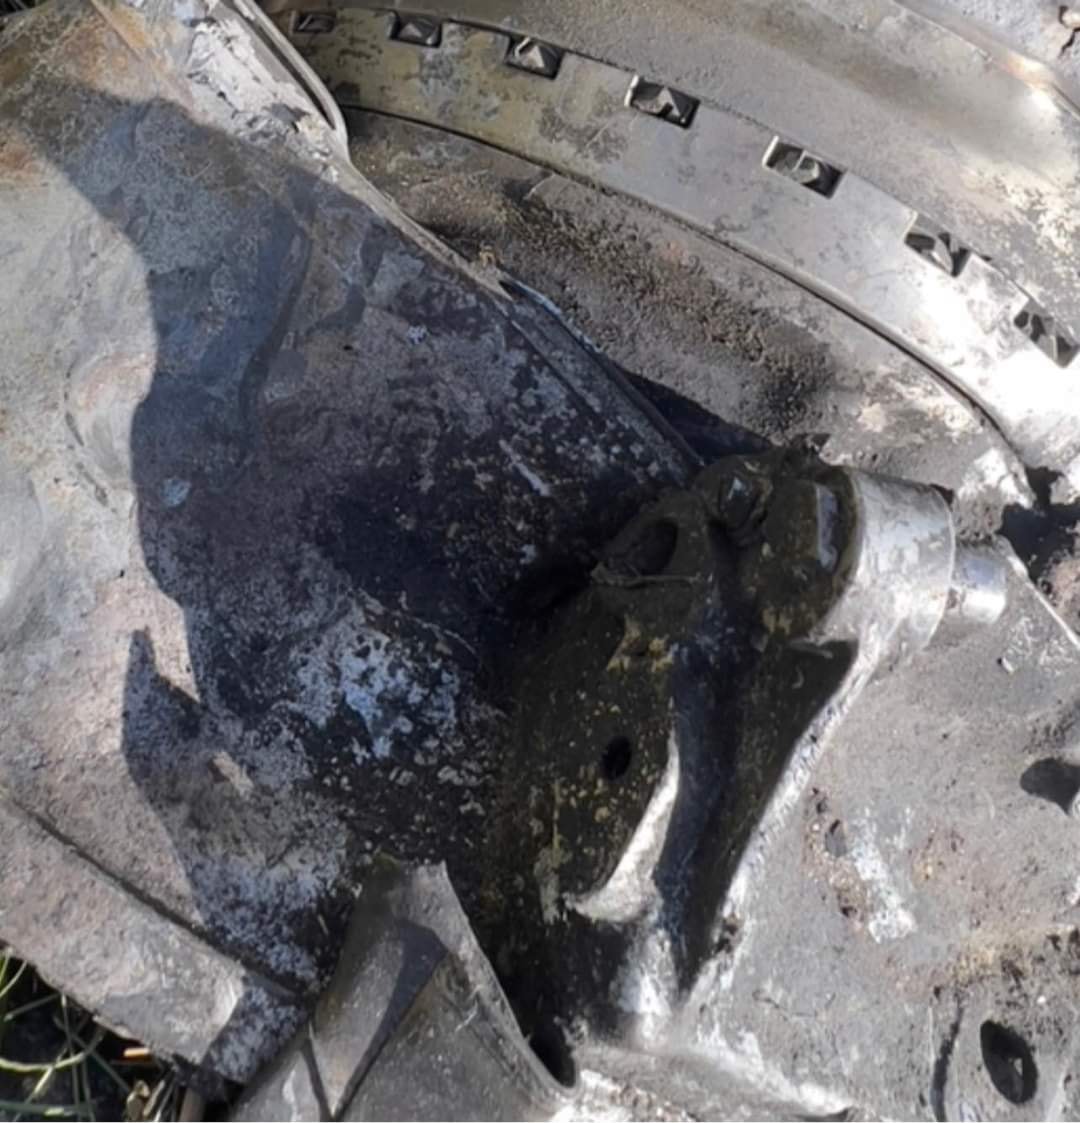 A part of cruise missile that was shot down near Kyiv, Defense Express